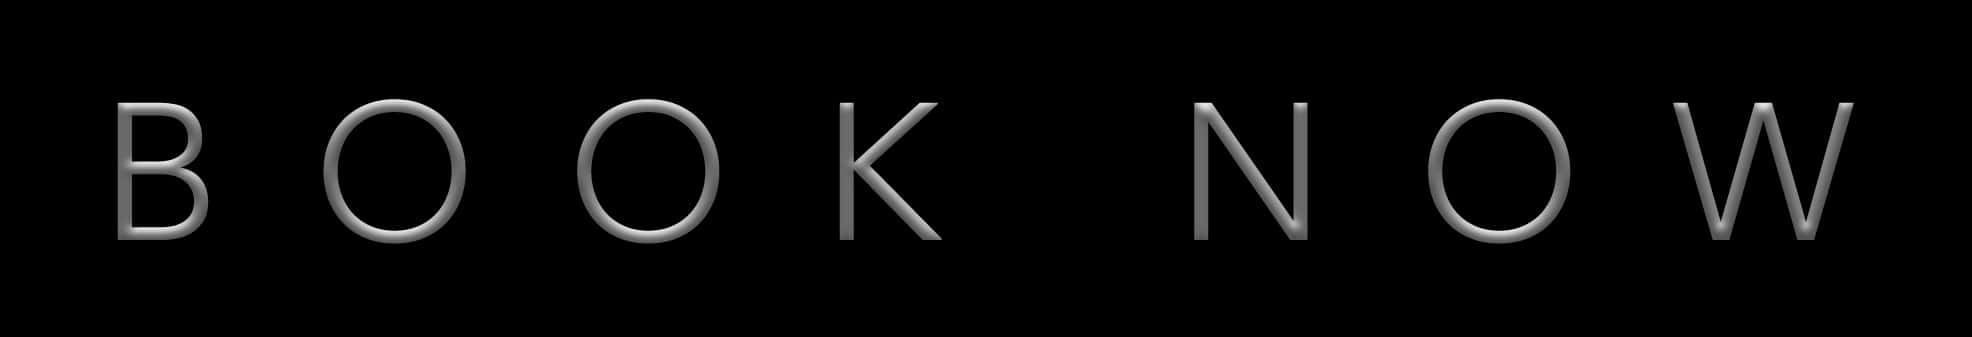 A Black Background With A Letter K